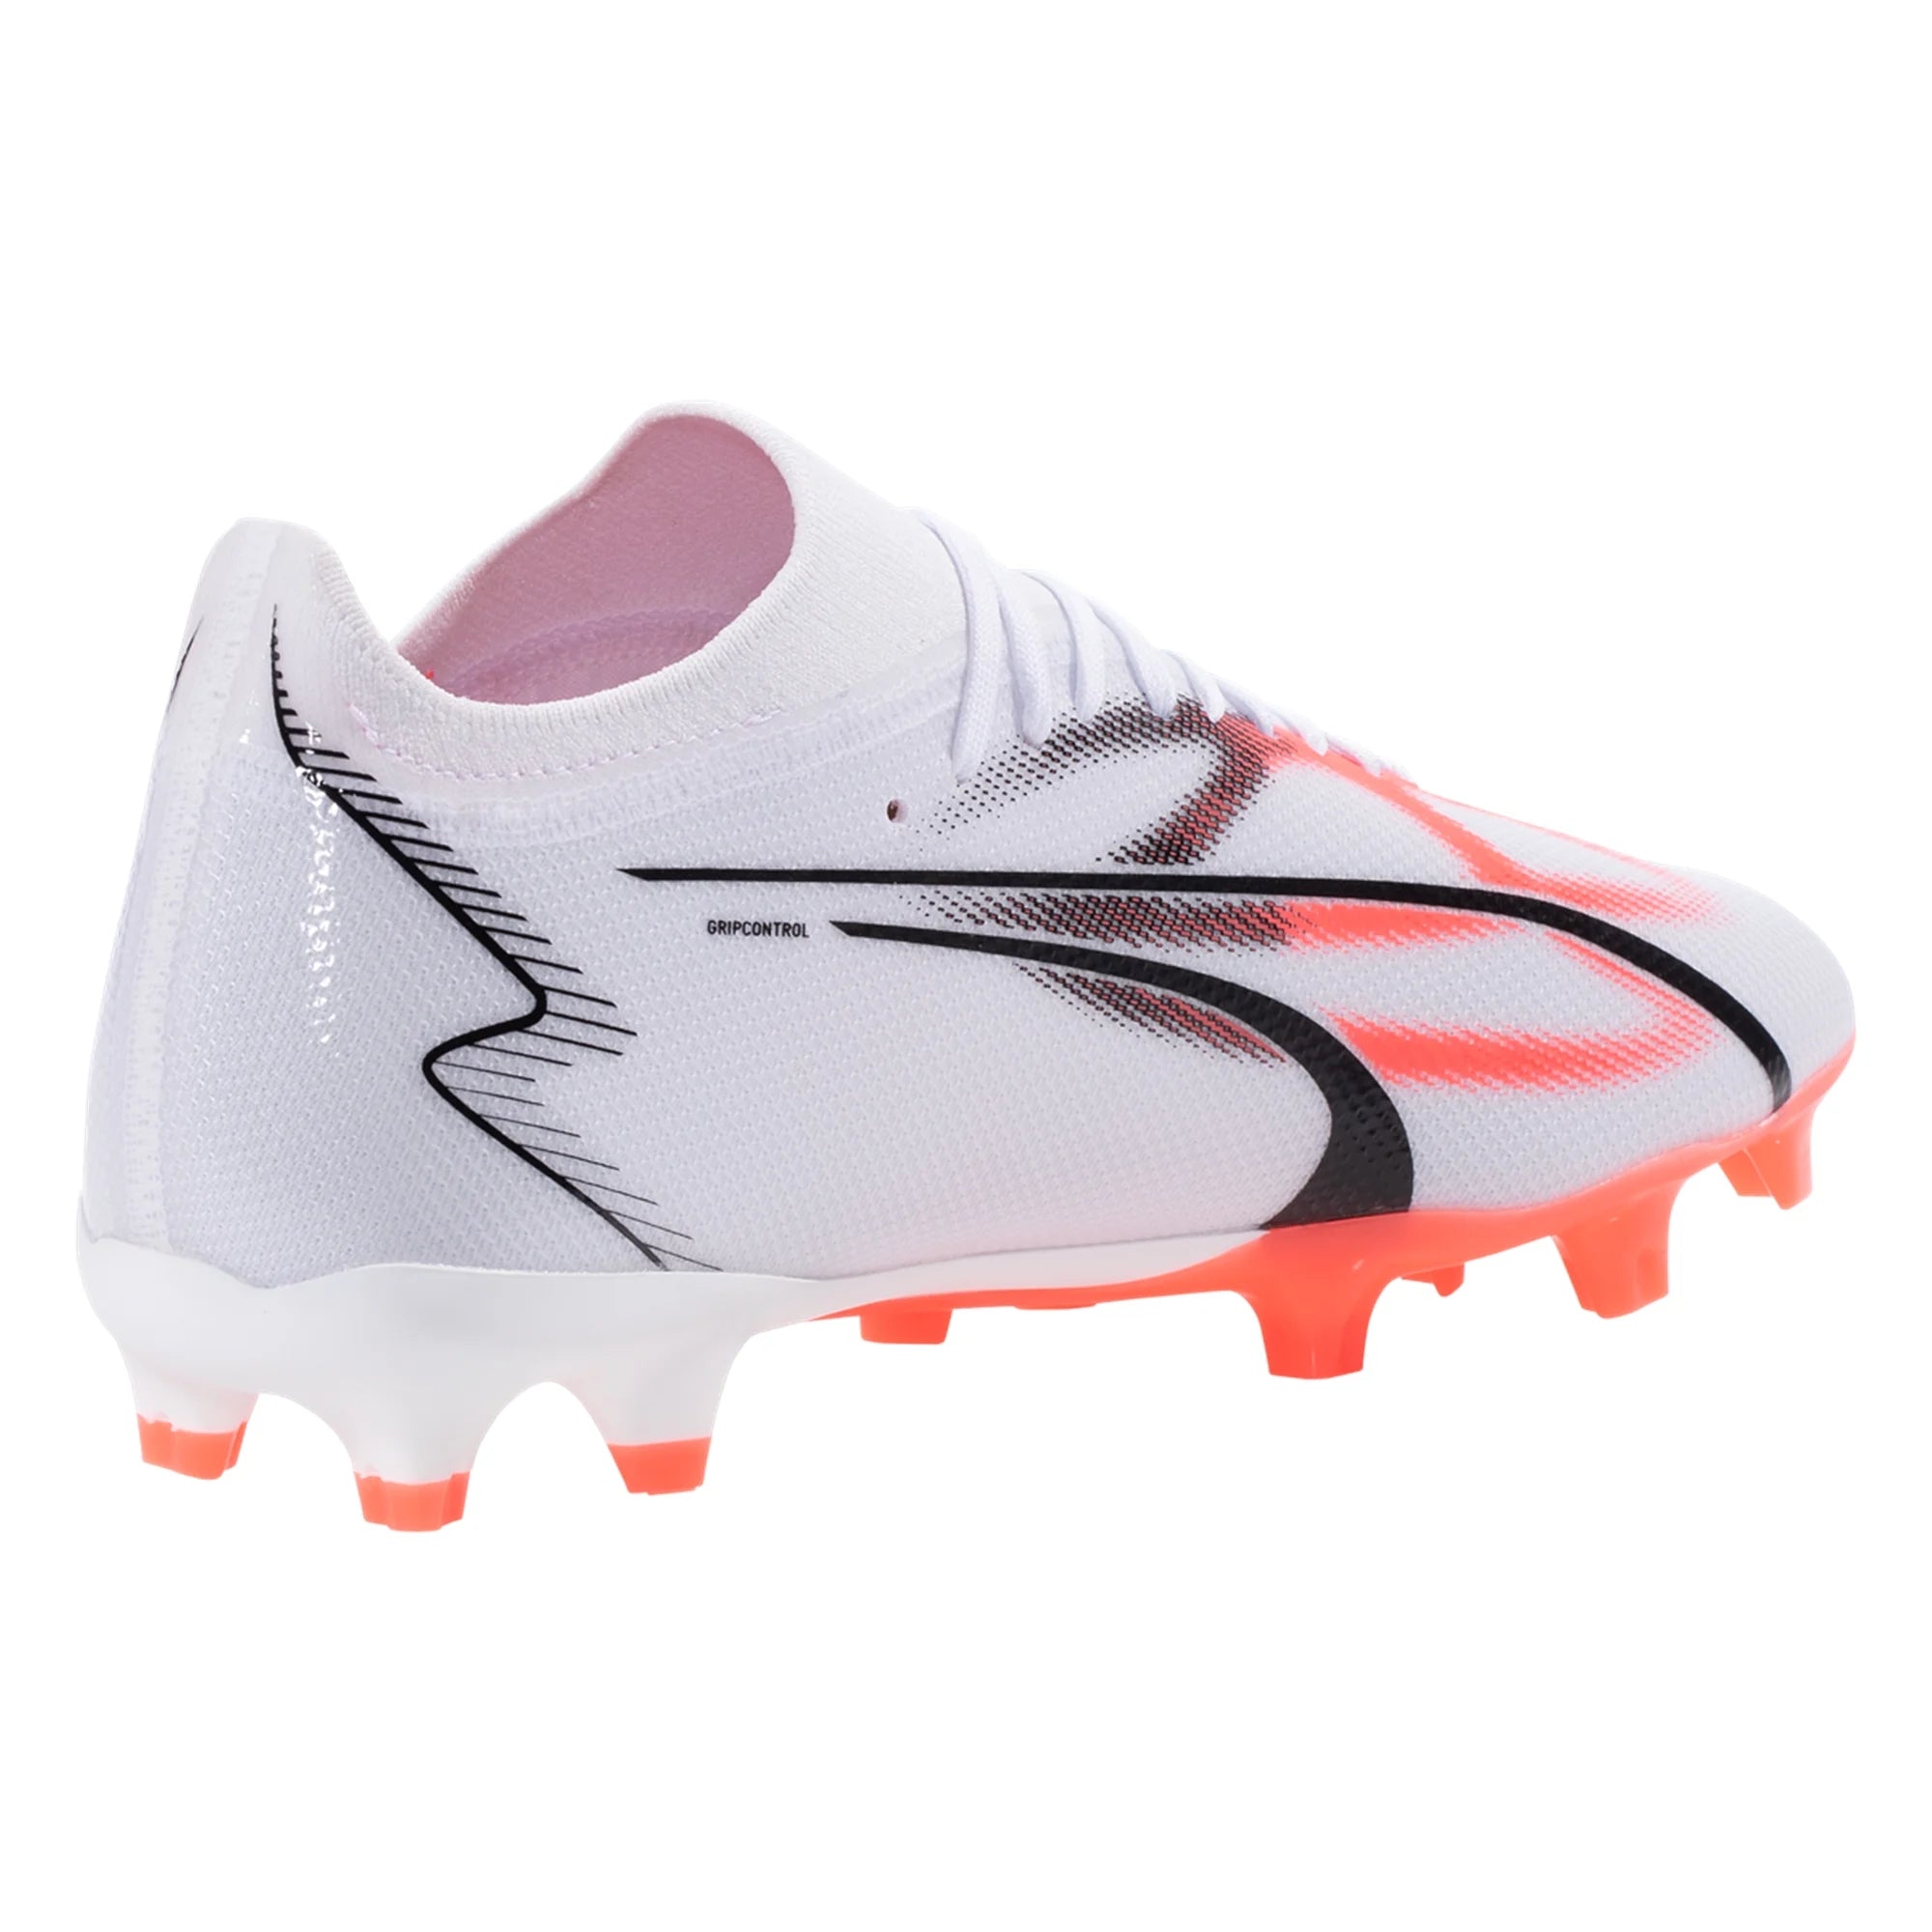 Orchid Puma – White/Black/Fire - Soccer Cleat Firm Ground Soccer USA Ultra 107347-01 FG/AG Match Zone